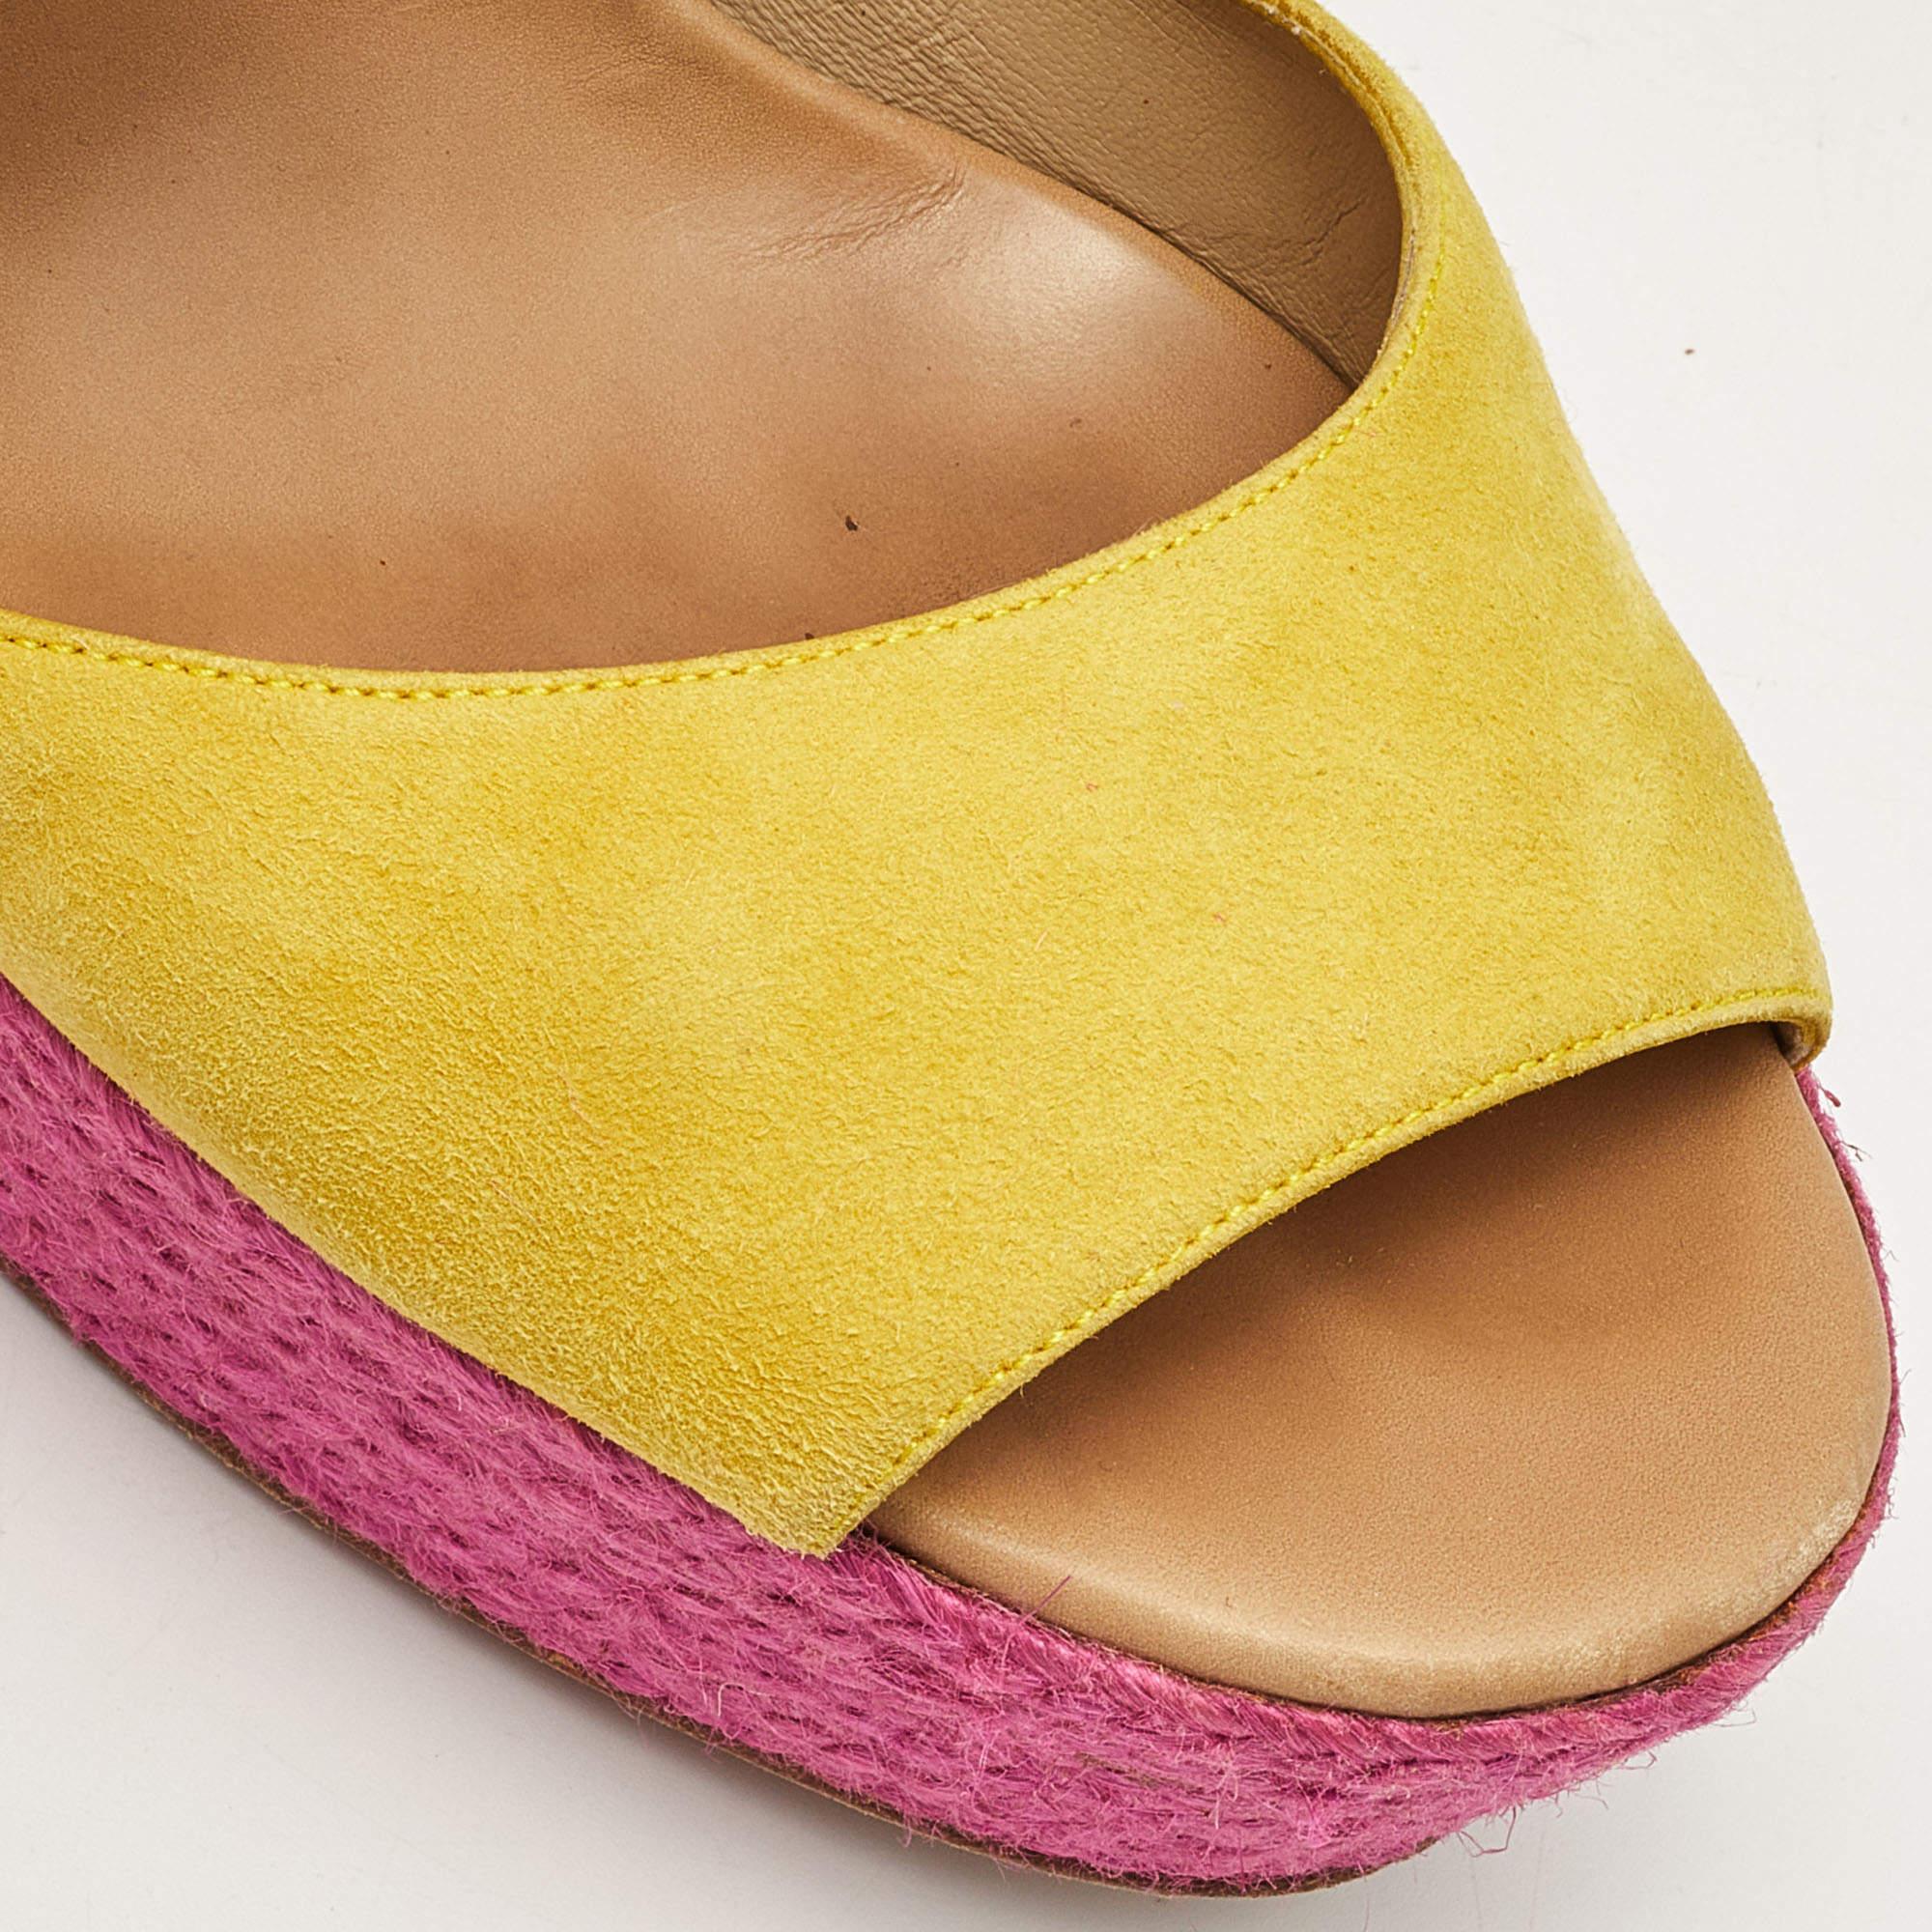 Christian Louboutin Yellow/Pink Suede Praia Wedge Sandals Size 40 1